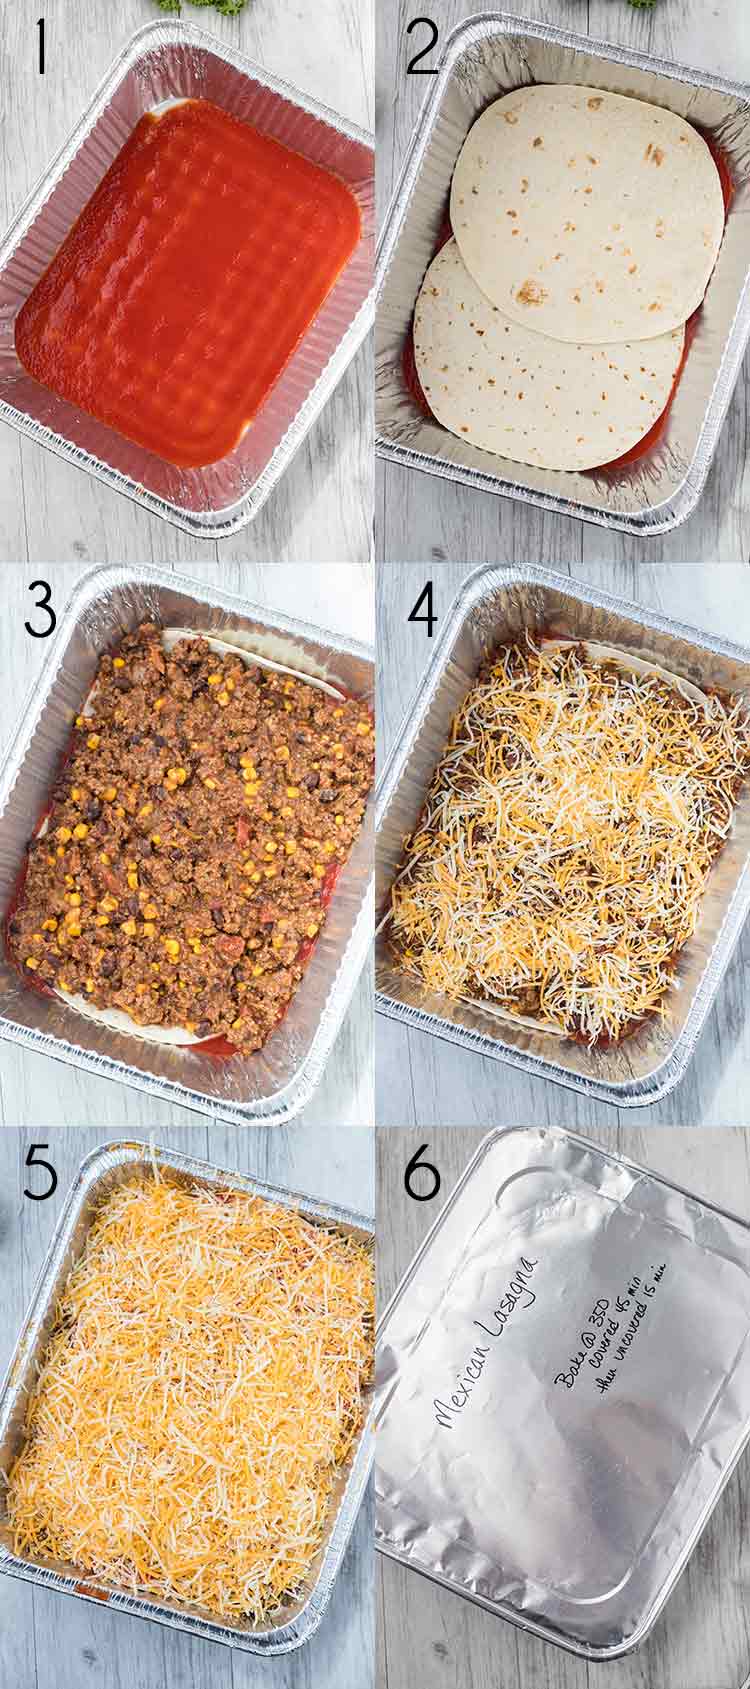 Collage of pictures showing a dish with the various layers of this Make-Ahead Mexican Lasagna